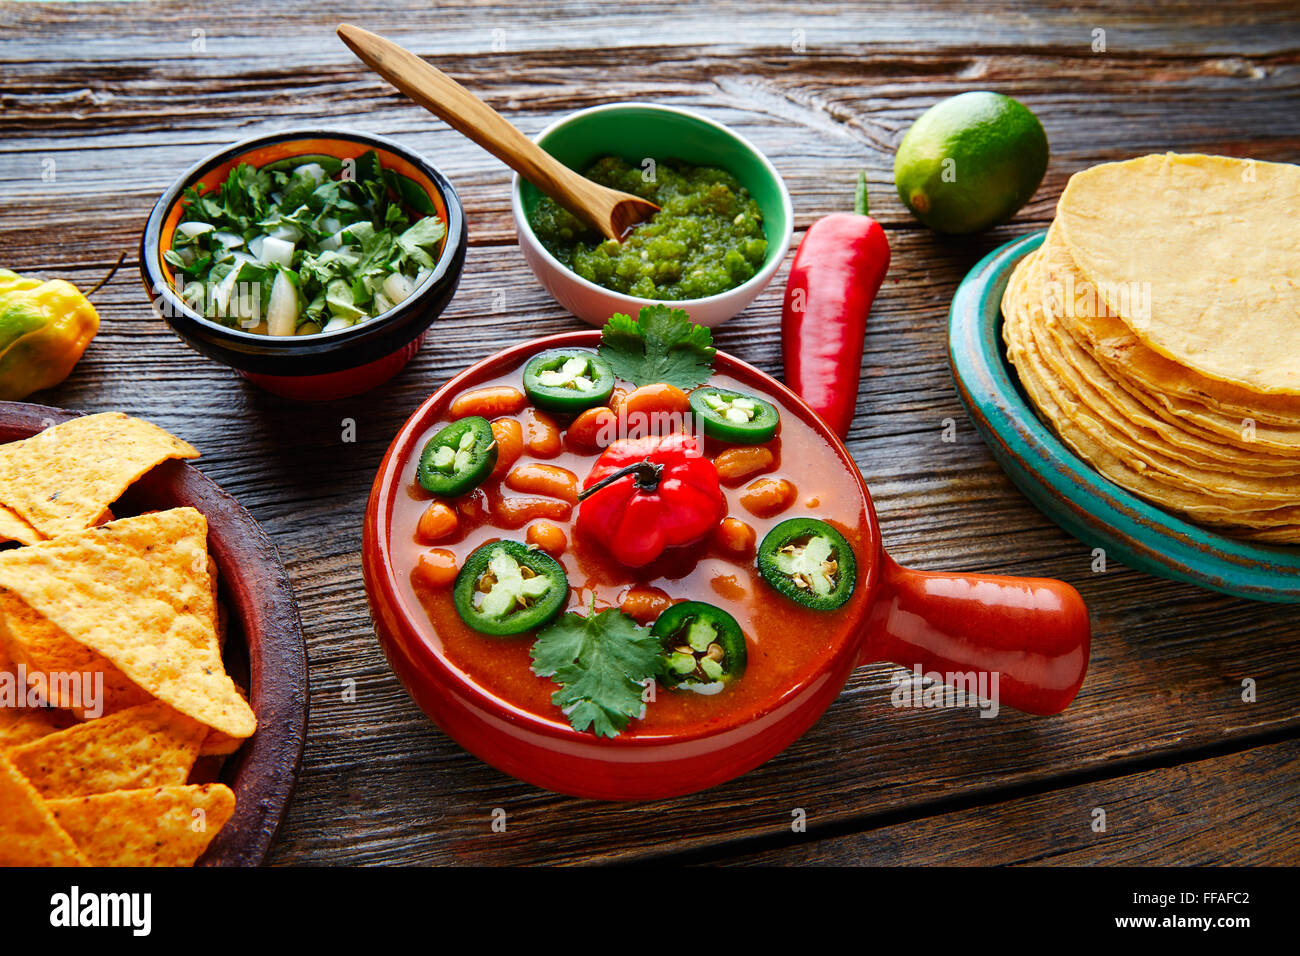 Frijoles charros mexican beans with chili pepper sides and tortillas Stock Photo